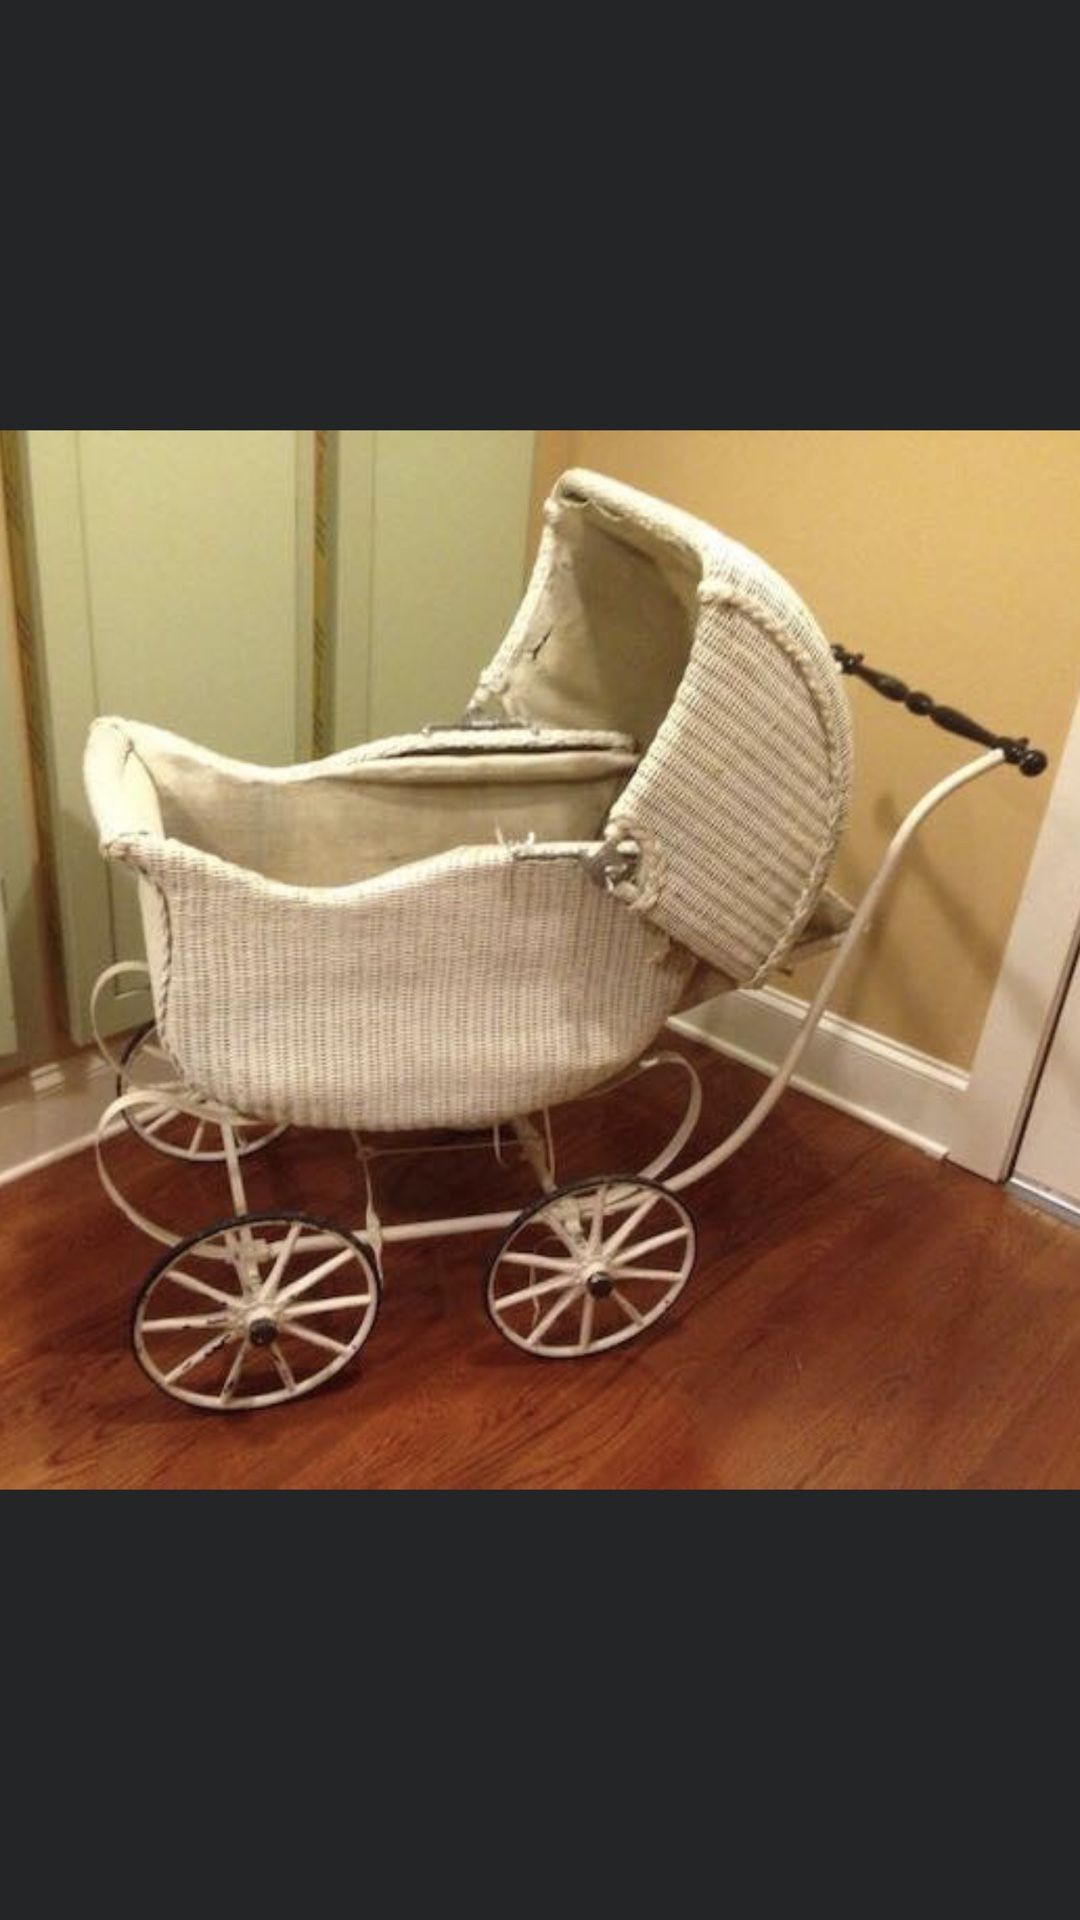 Antique wicker stroller, great for displaying dolls or blankets,etc